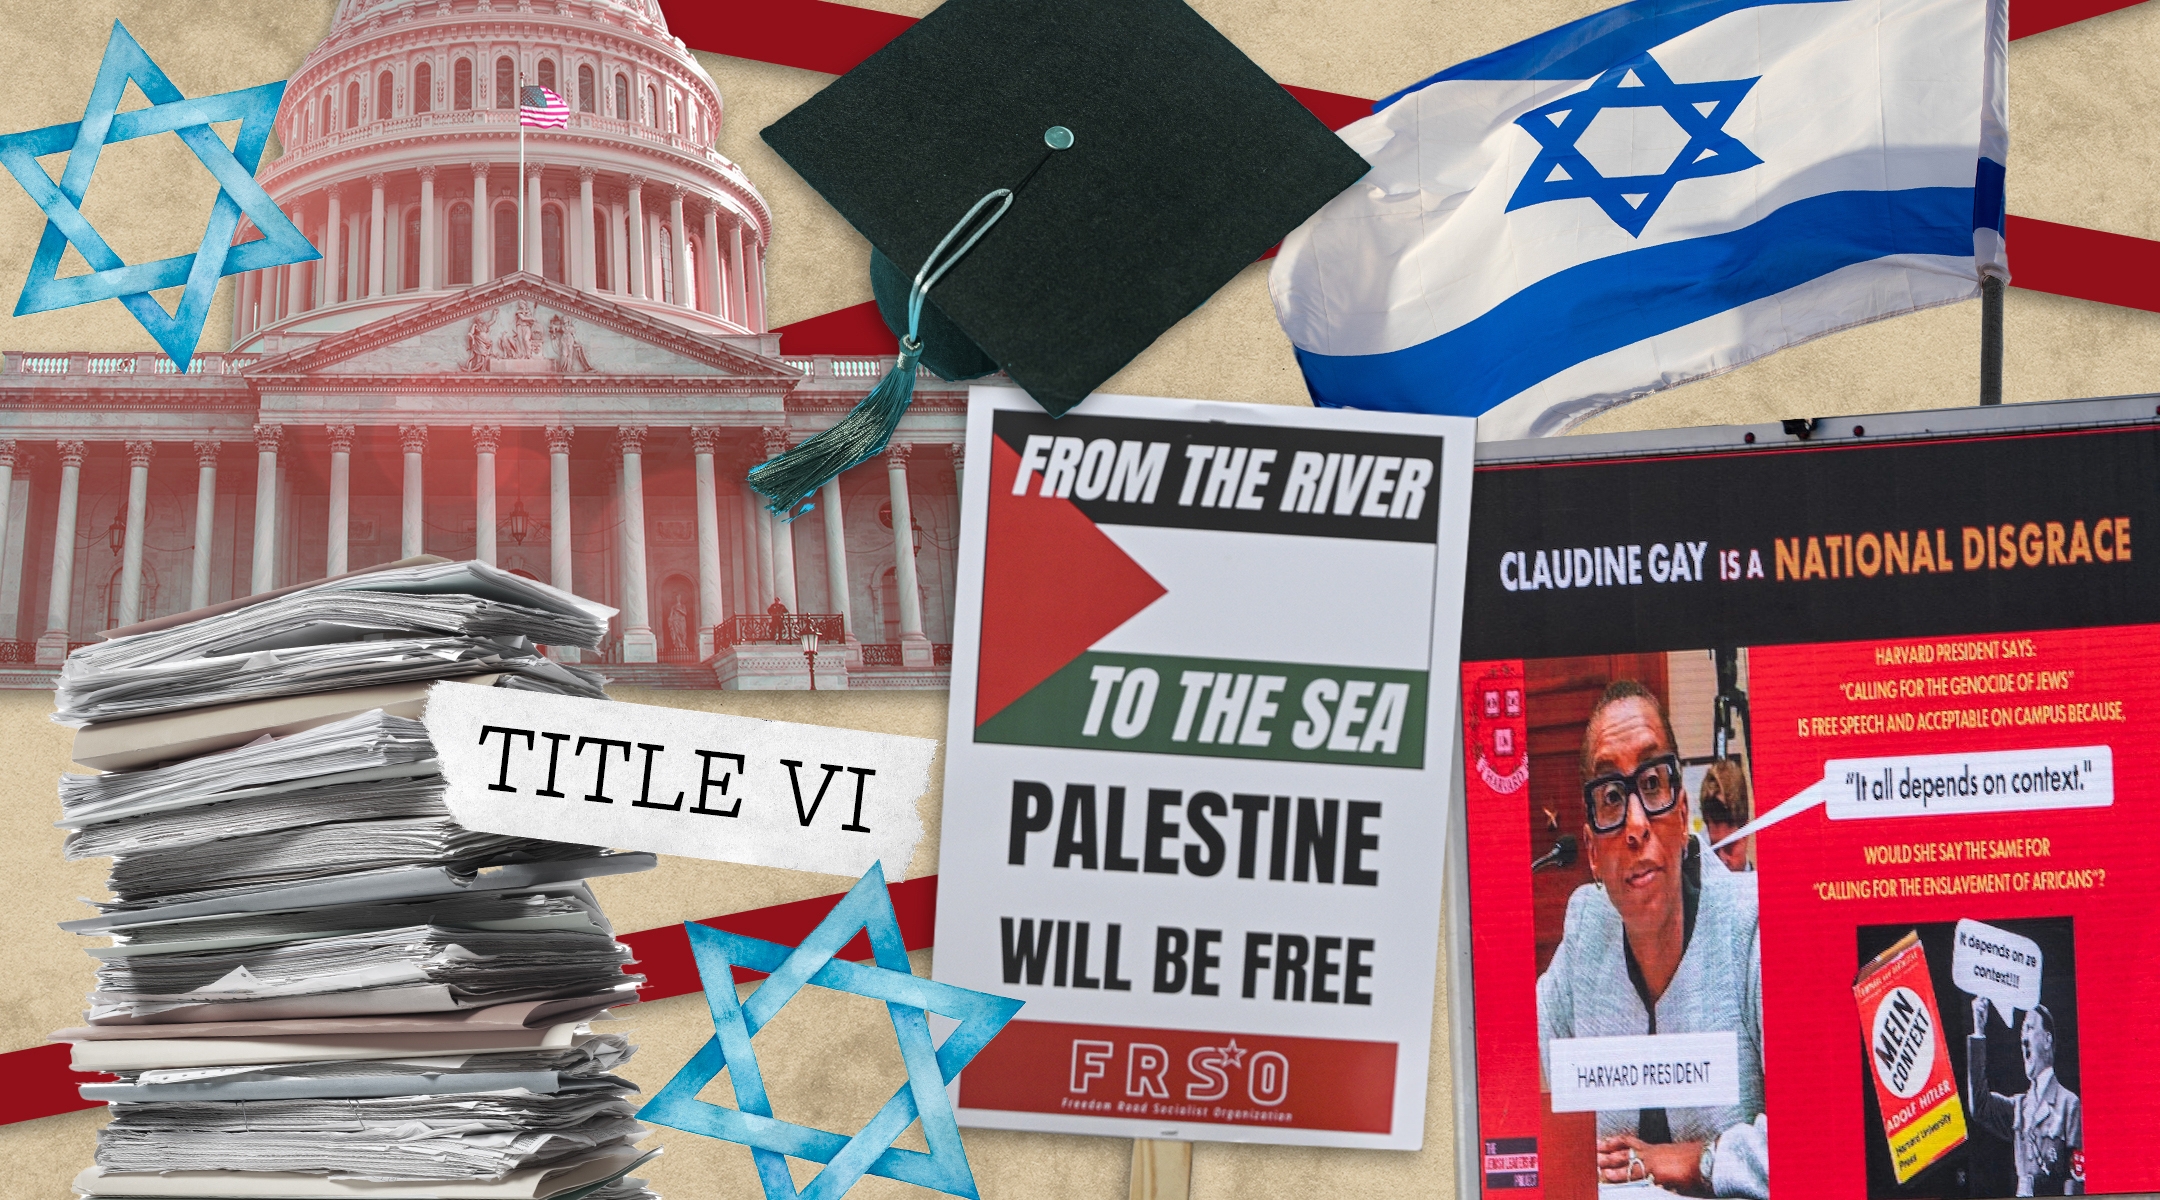 A collage of campus-related incidents of antisemitism and Islamophobia: Israeli and Palestinian flags, "doxxing trucks" attacking Harvard, and a "Title VI" label alongside red tape and stacks of books.